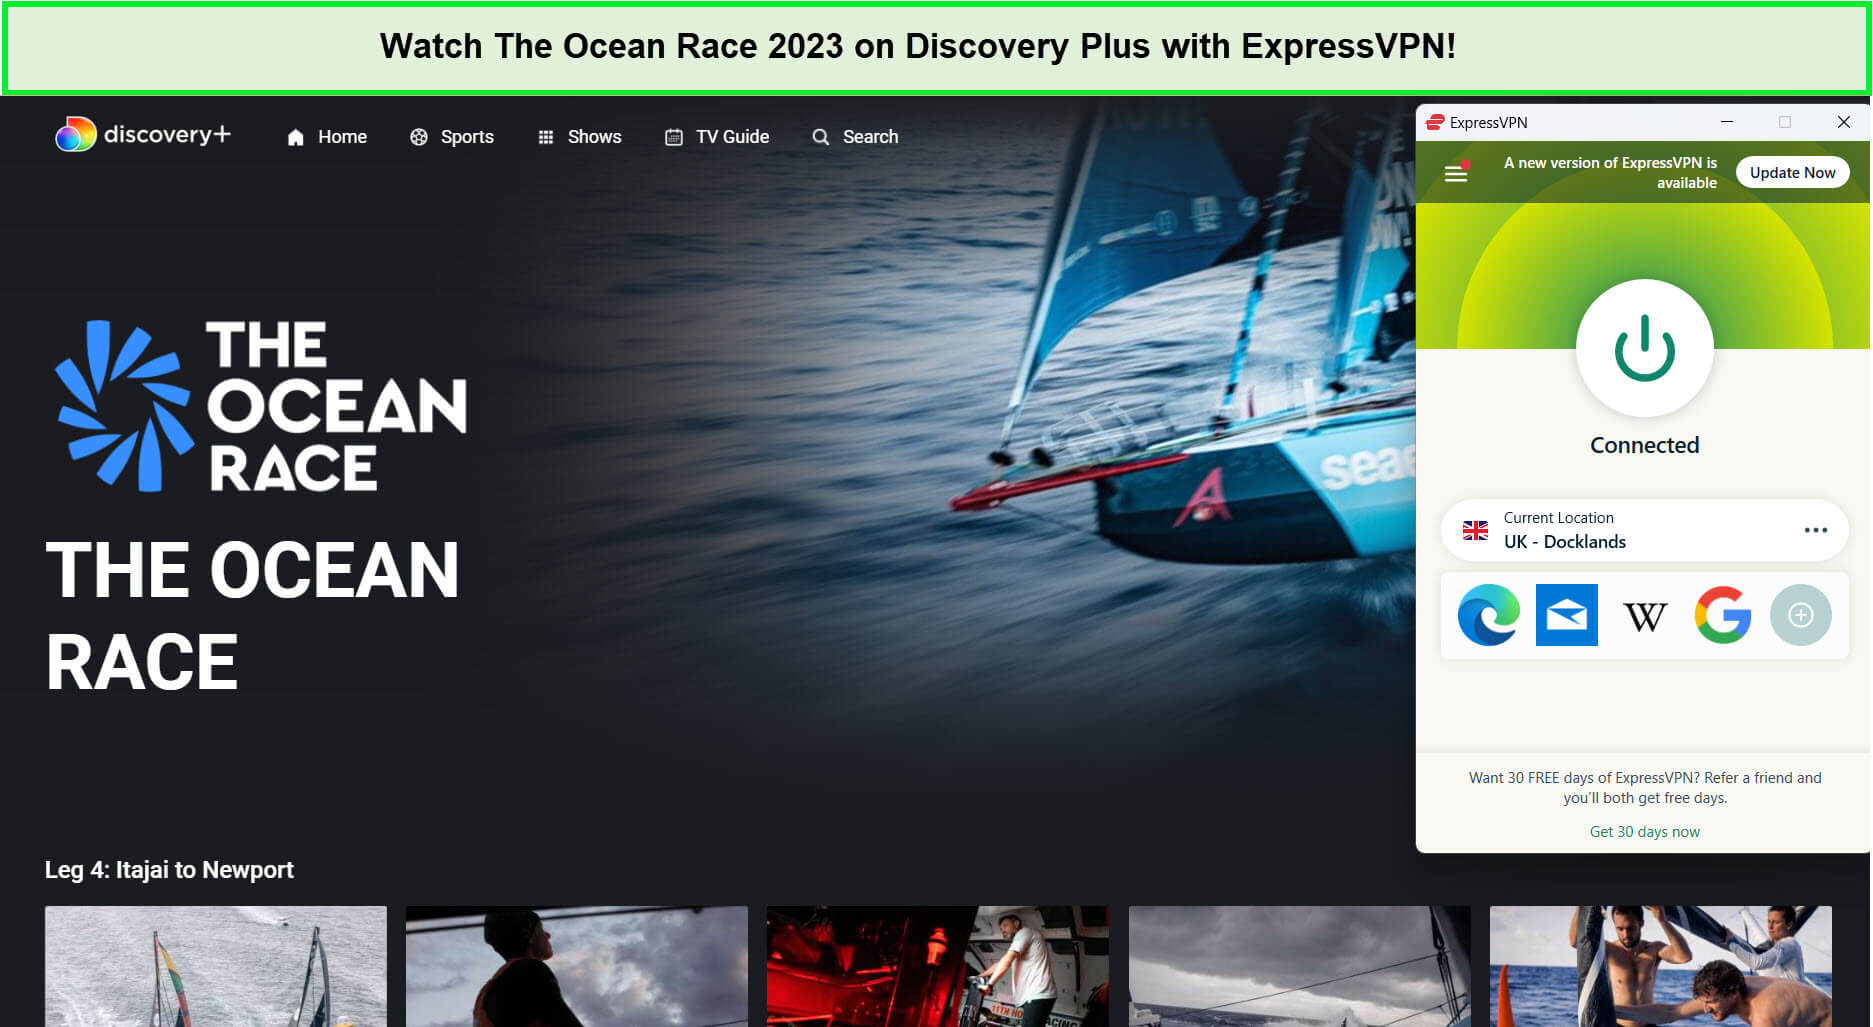 expressvpn-unblocks-the-ocean-race-2023-live-in-South Korea-on-discovery-plus